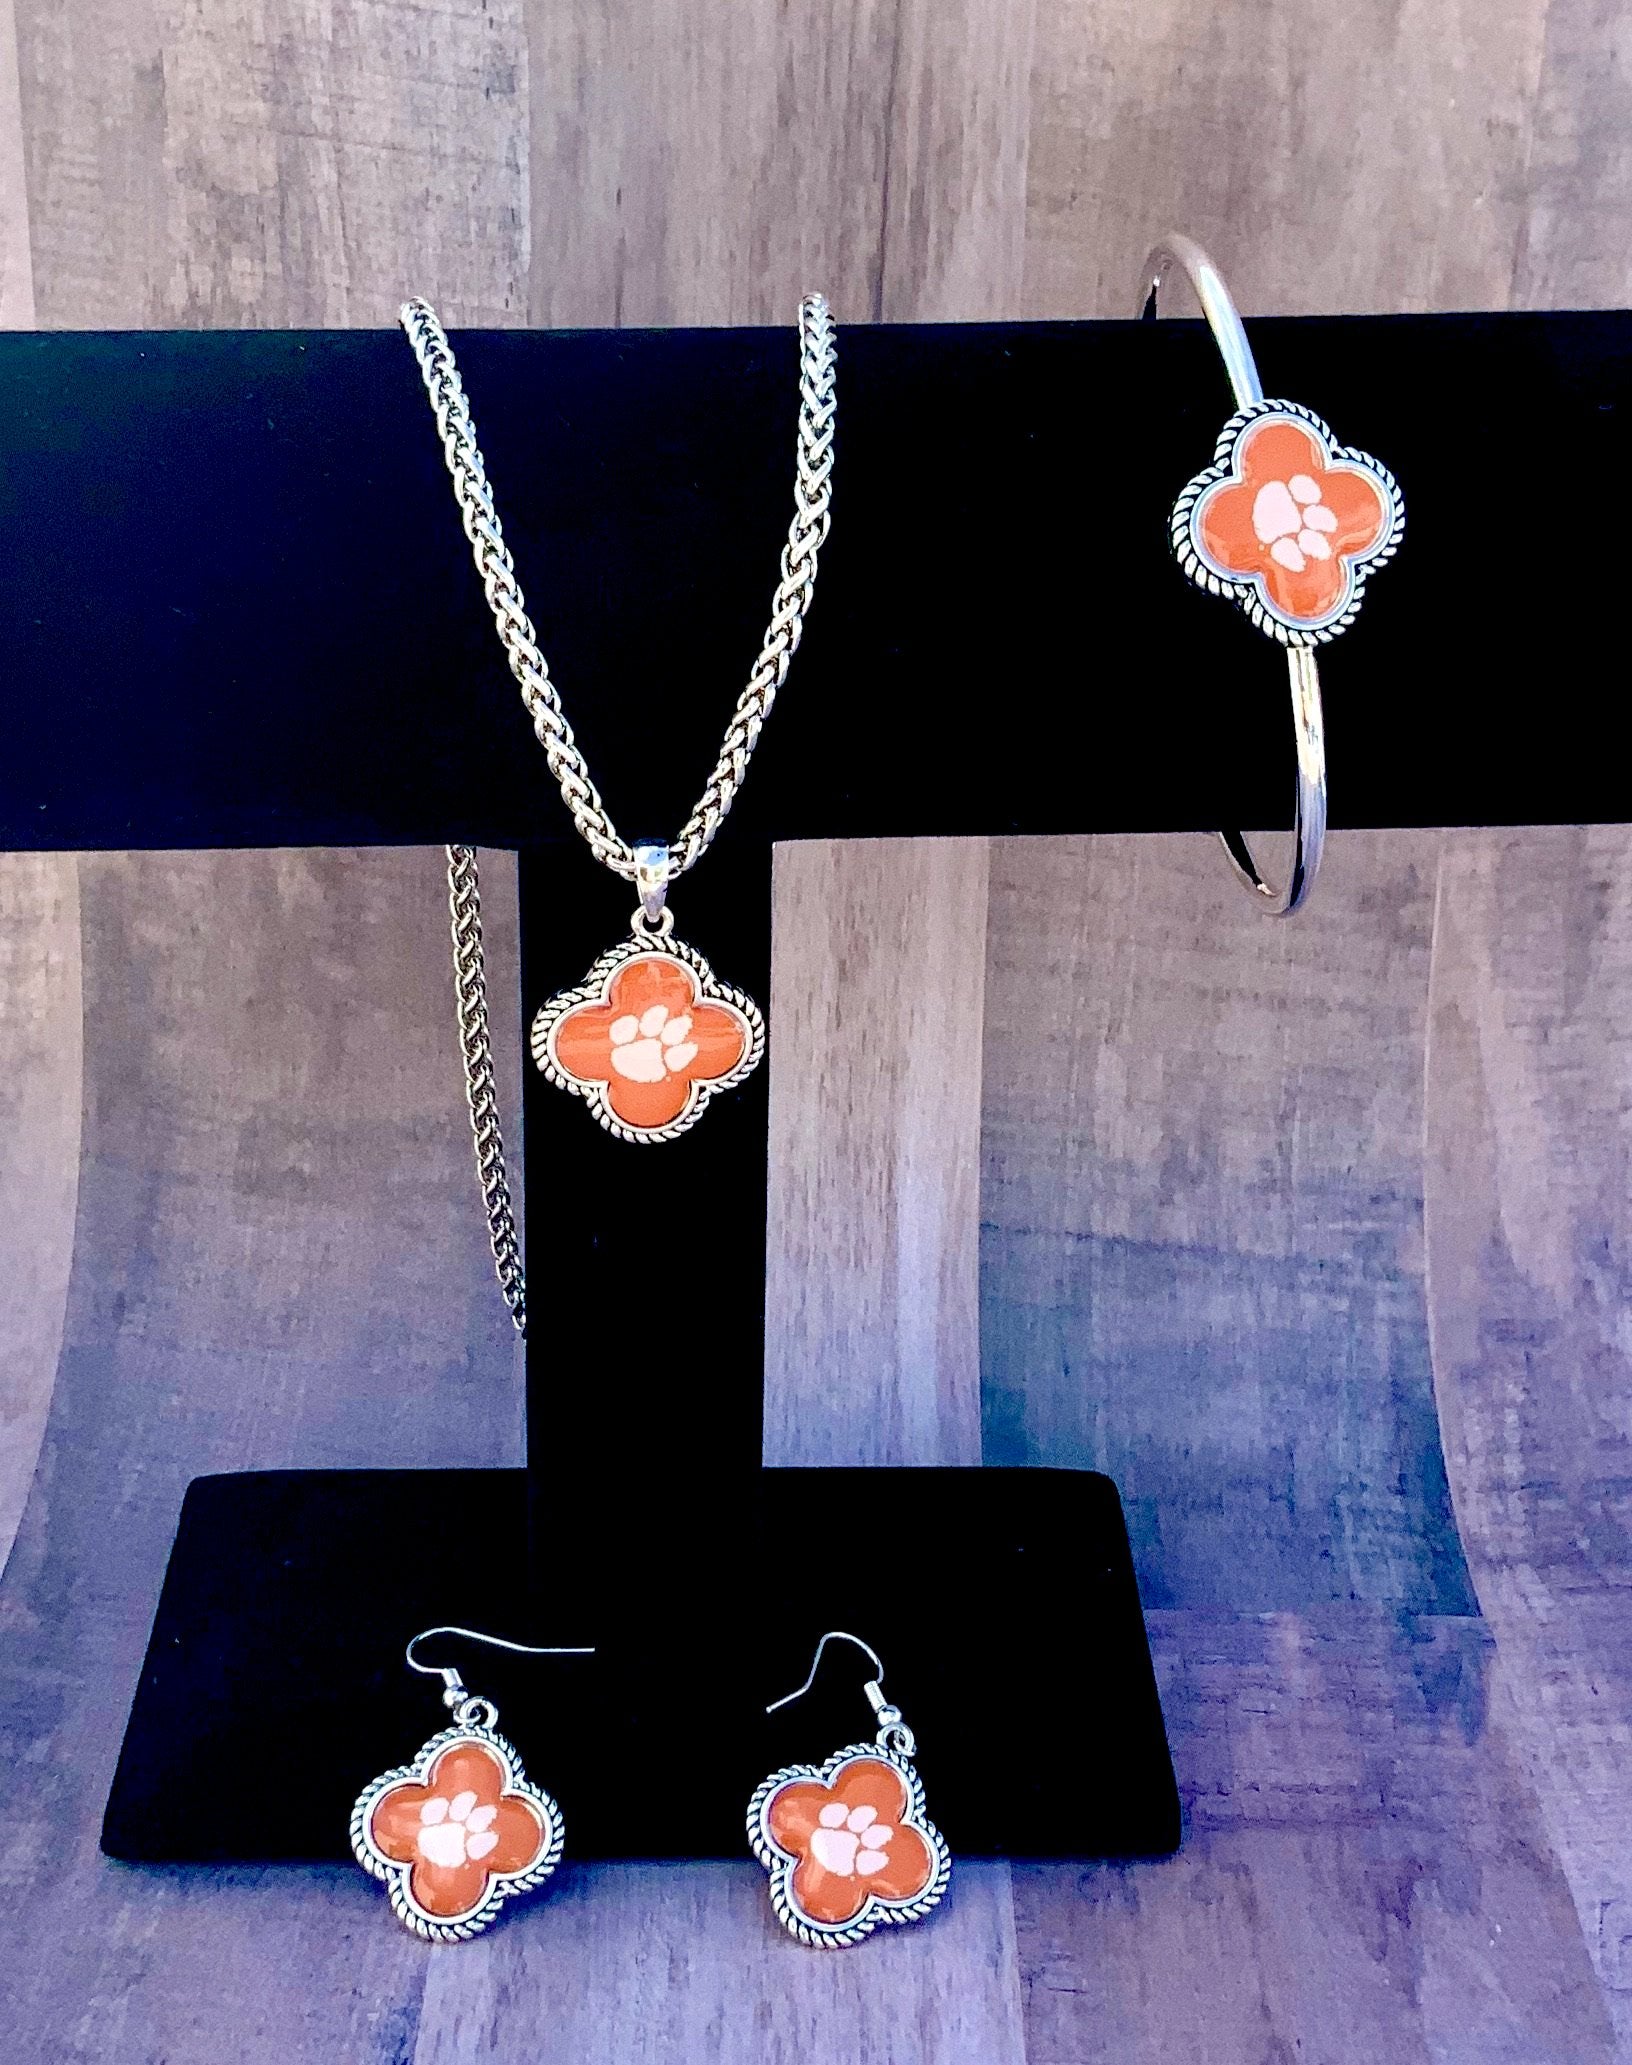 Officially Licensed Clover with Clemson Paw Collection